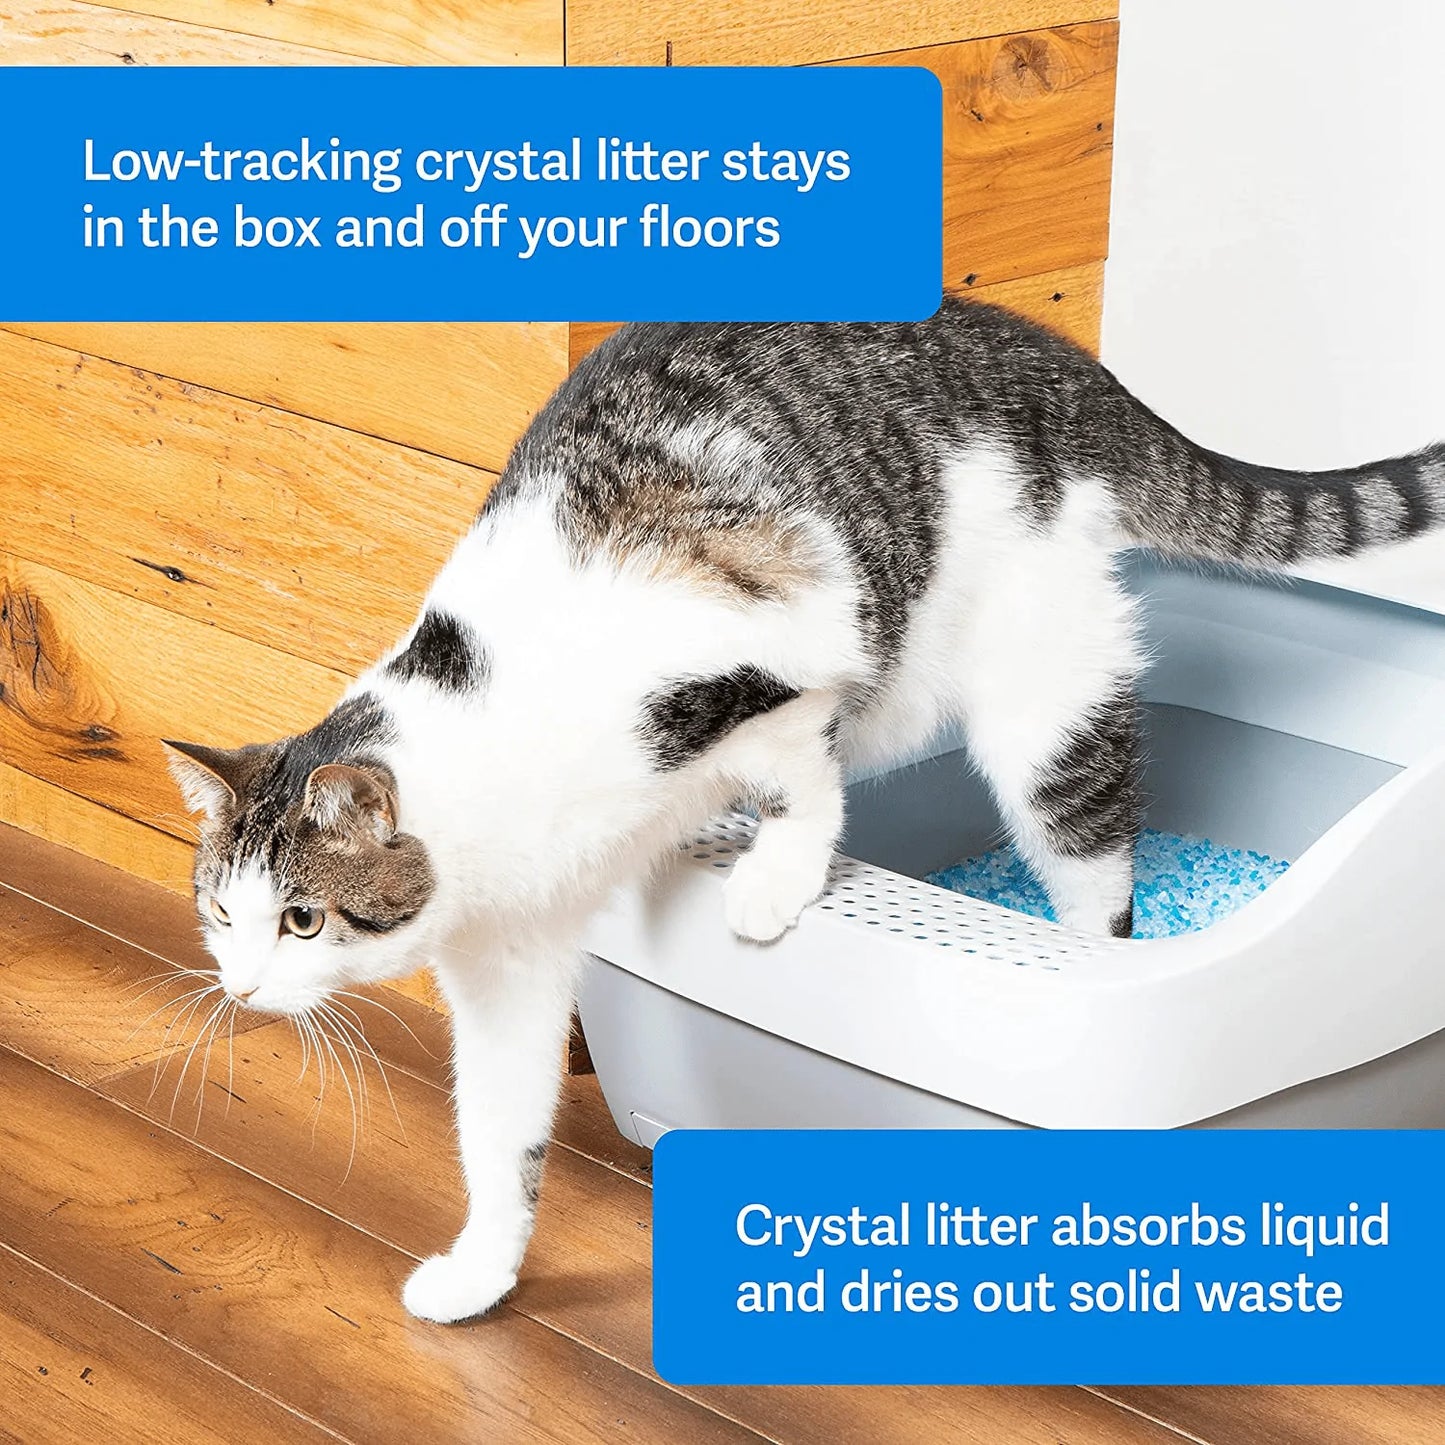 Petsafe Scoopfree Premium Crystal Cat Litter - Includes 2 Bags (4.5 Lb Each) of Litter - Works with Any Traditional Litter Box, Absorbs Faster than Clay Clumping, Low Tracking for Less Mess Animals & Pet Supplies > Pet Supplies > Cat Supplies > Cat Litter Waste Management   